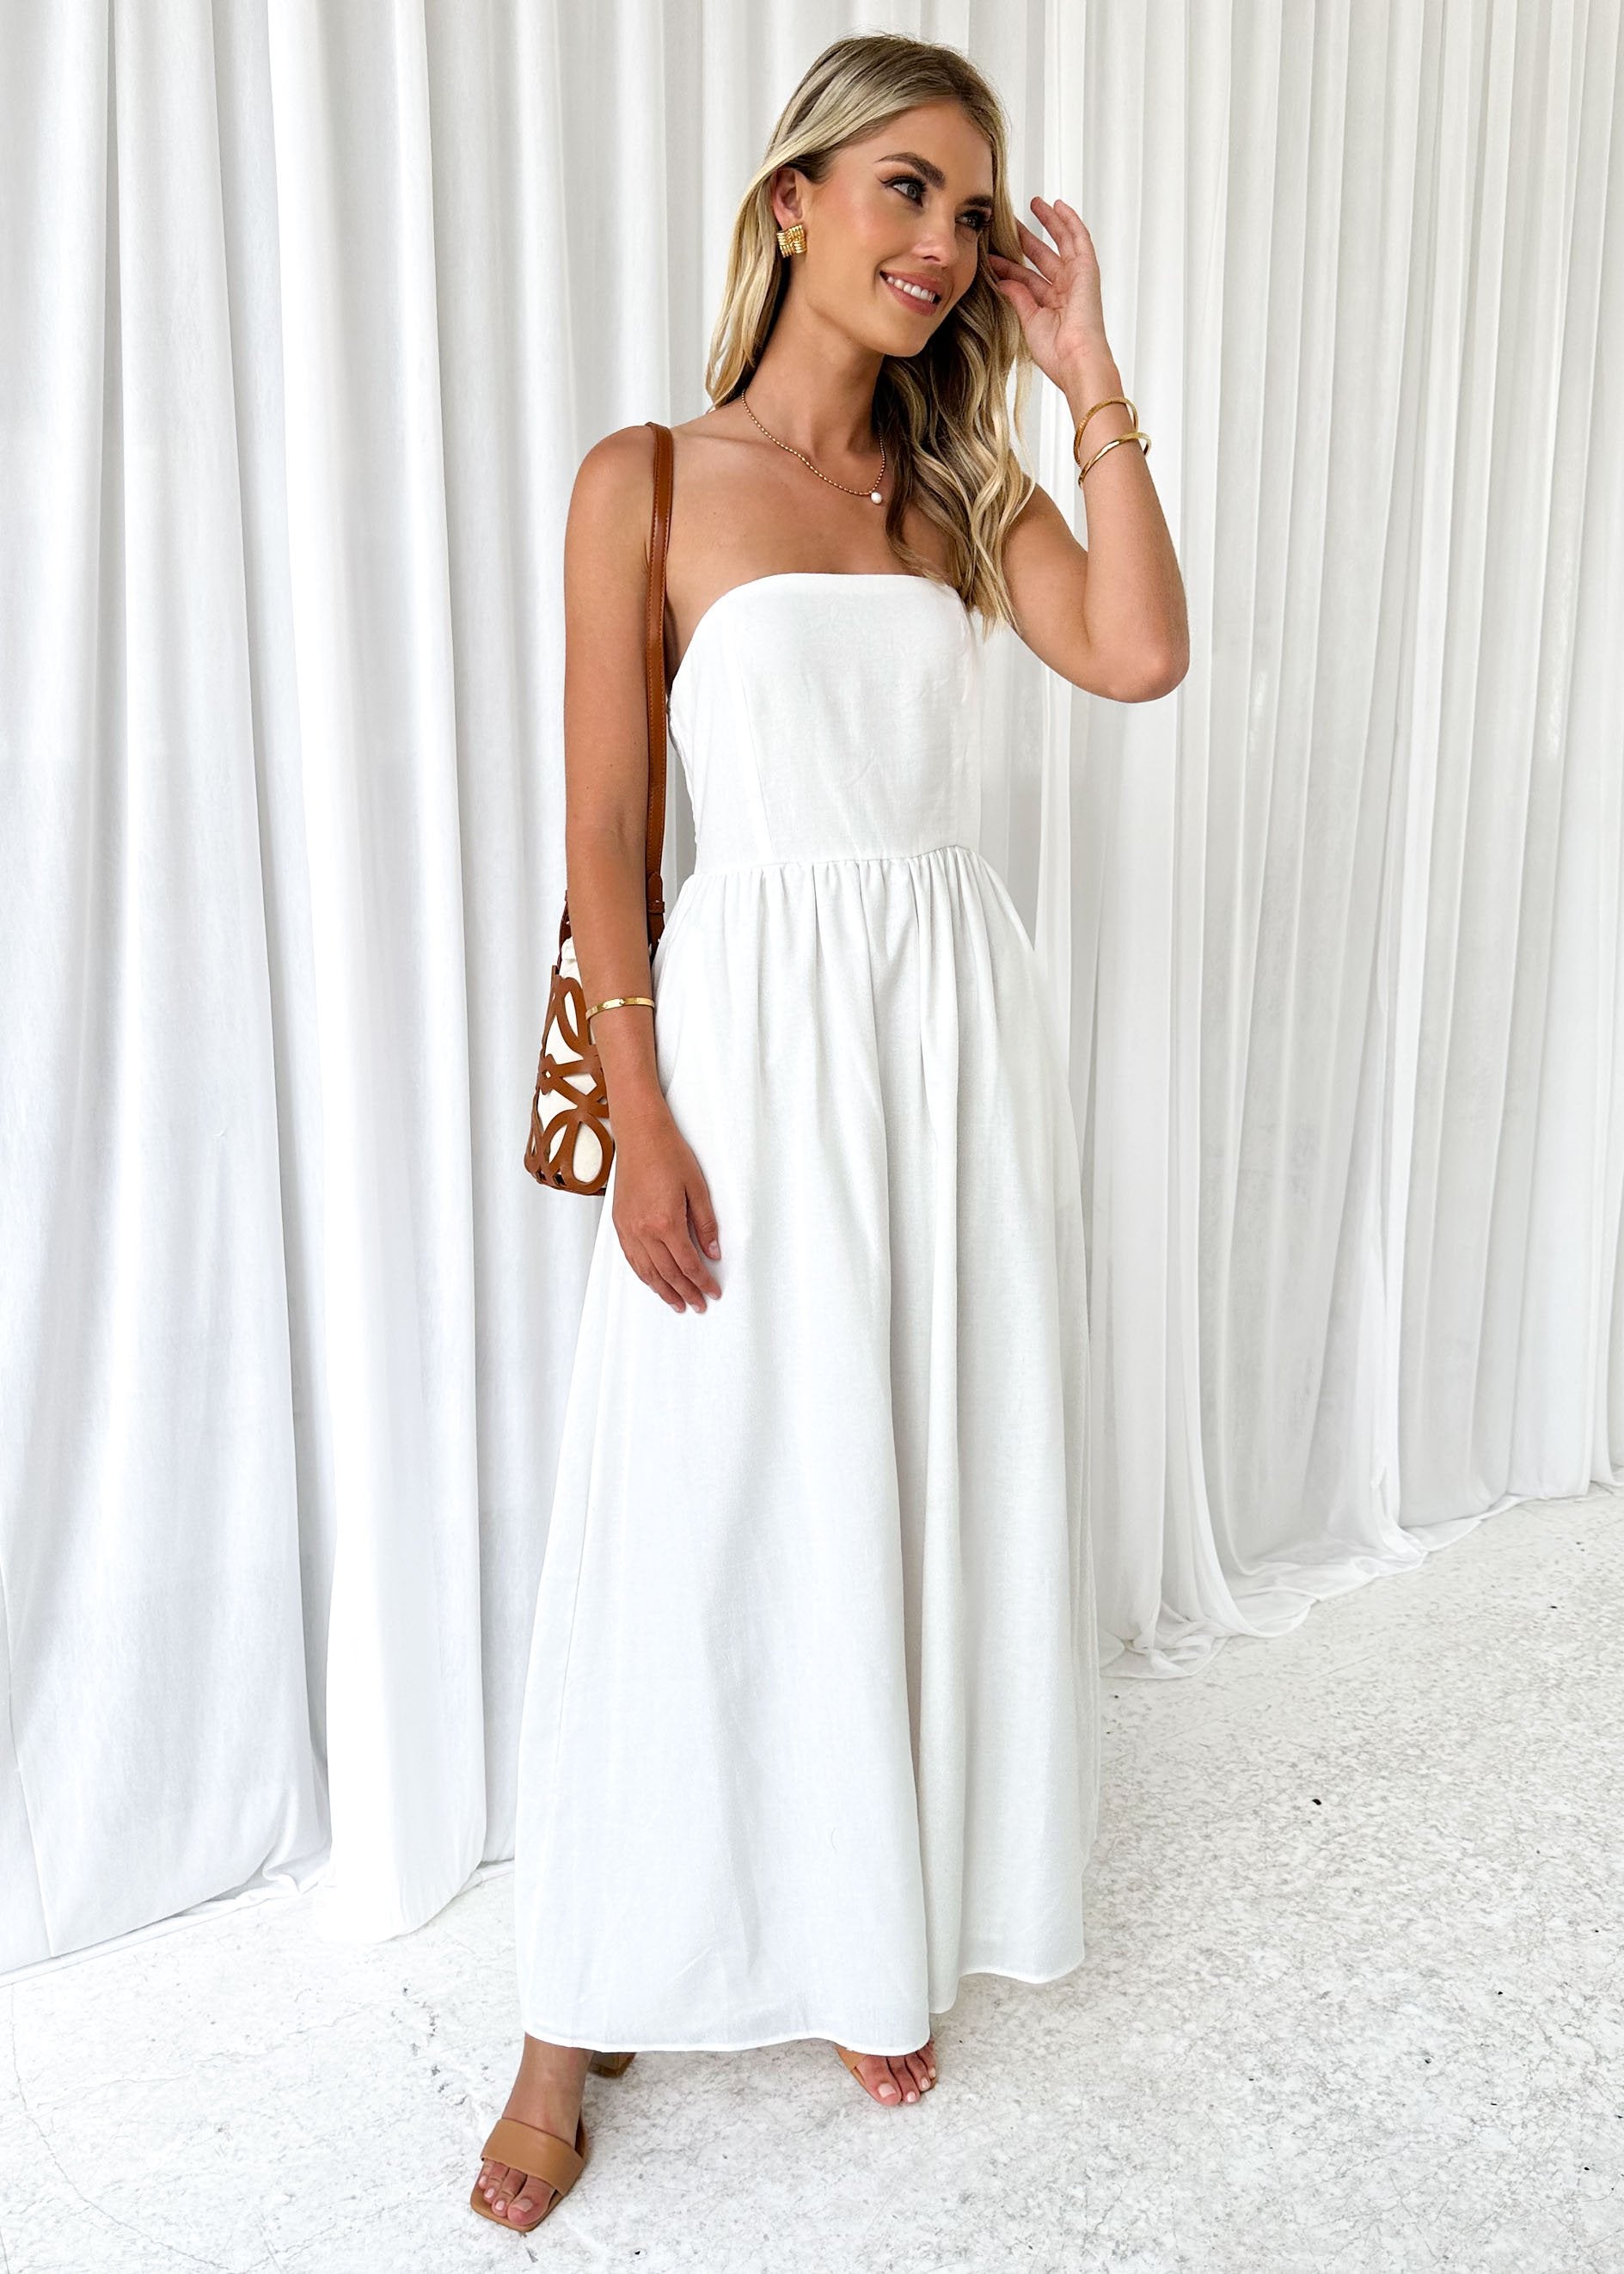 Sharliee Strapless Maxi Dress - Off White